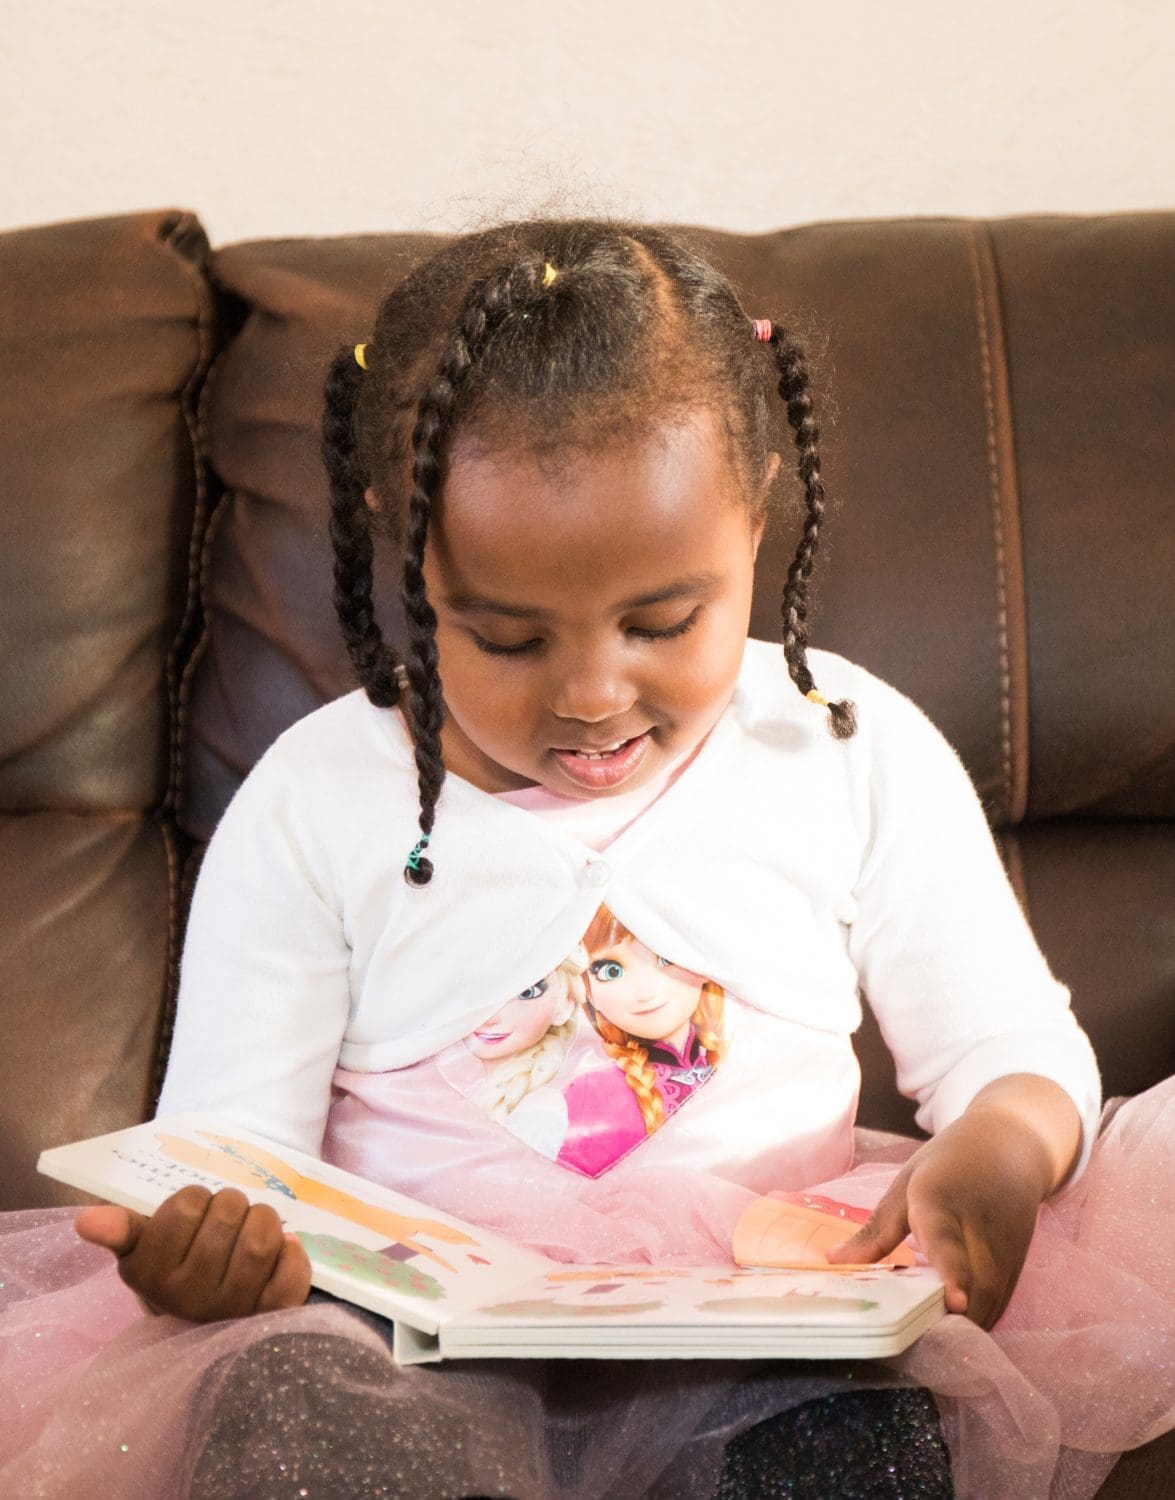 Volunteer to read with children this New Year